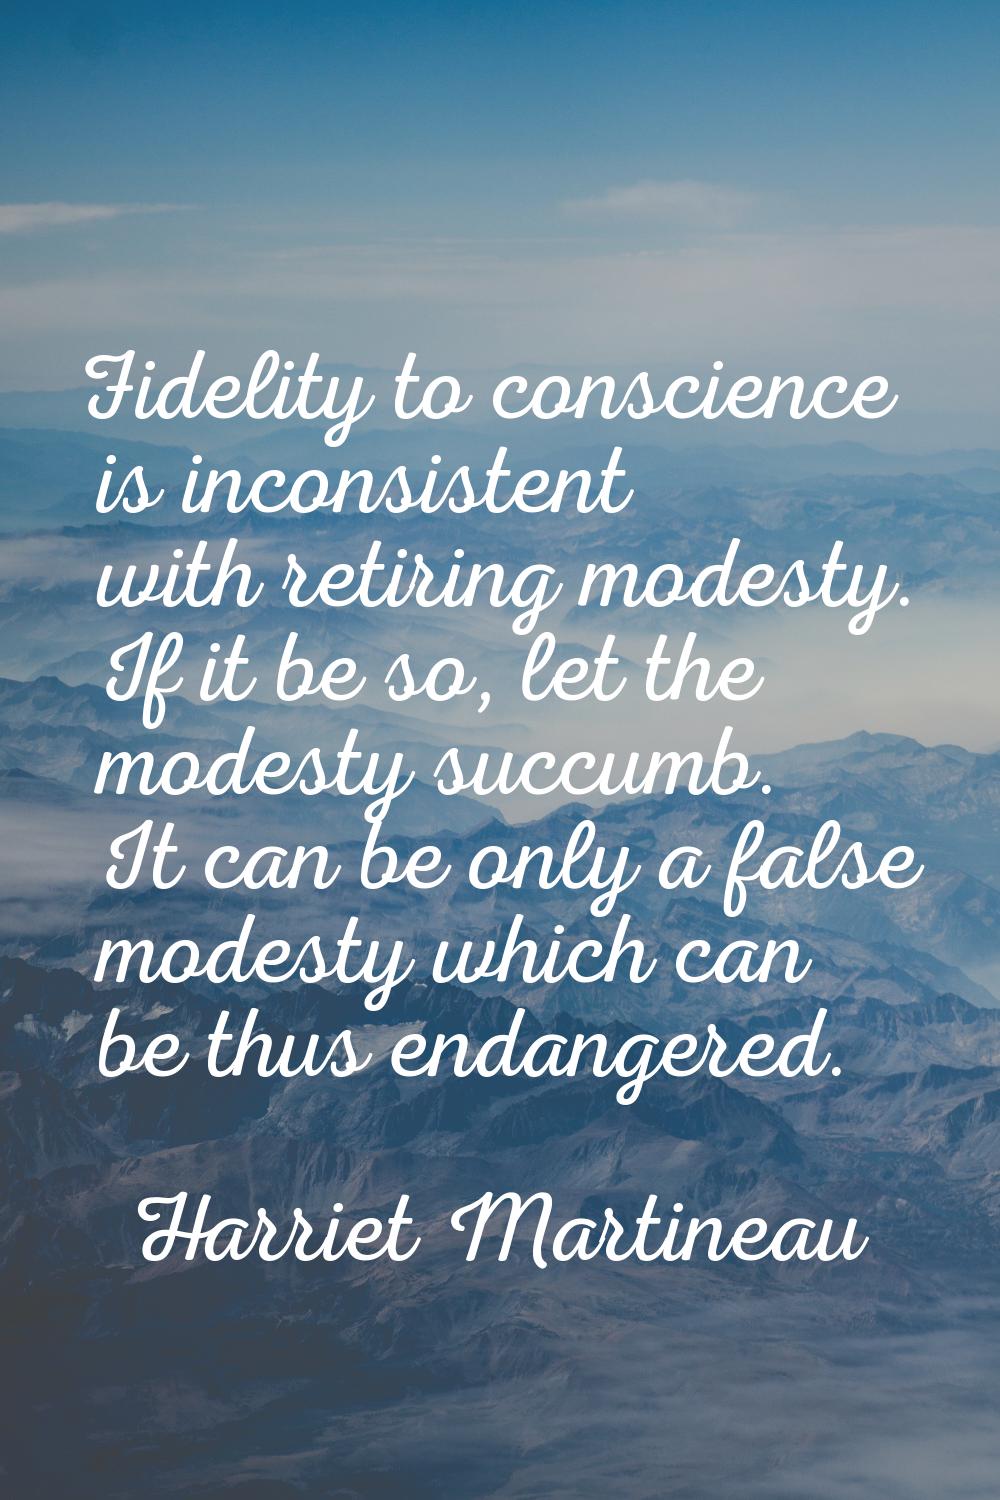 Fidelity to conscience is inconsistent with retiring modesty. If it be so, let the modesty succumb.